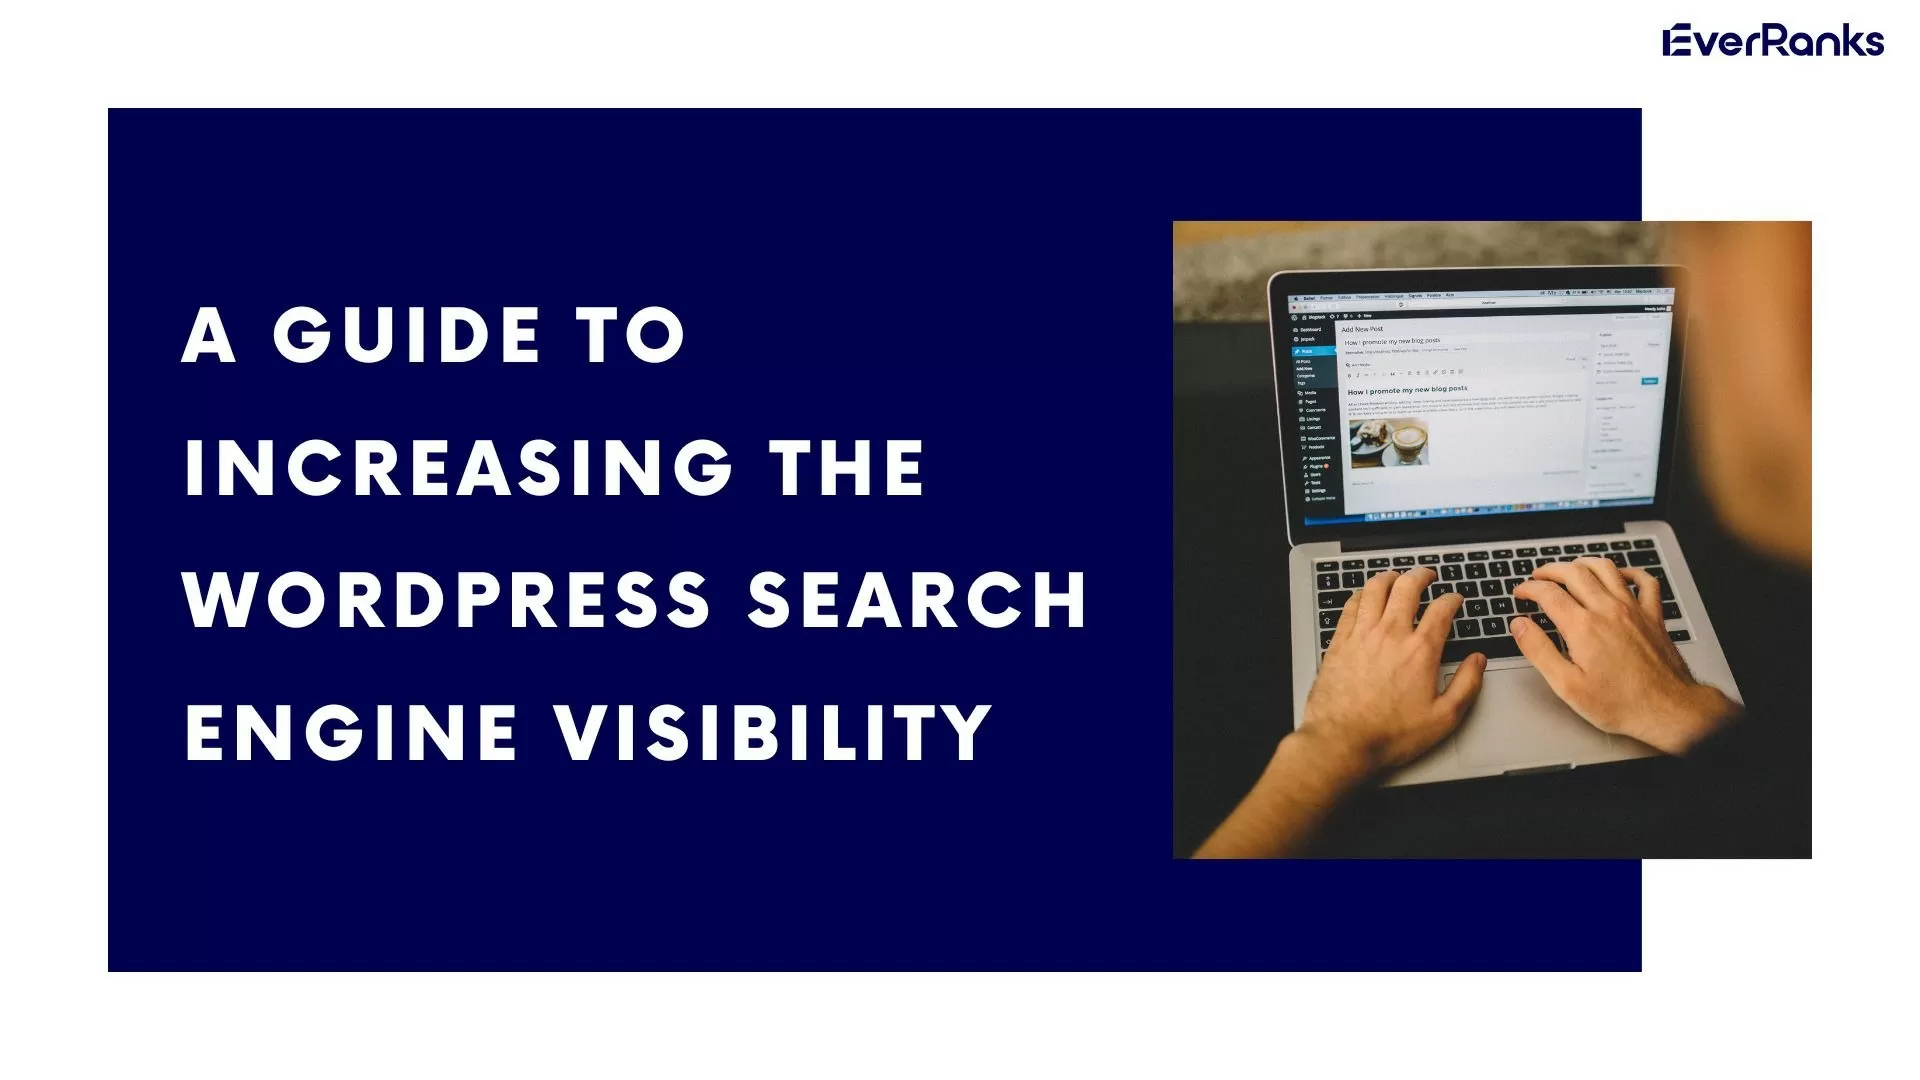 A Guide To Increasing The WordPress Search Engine Visibility